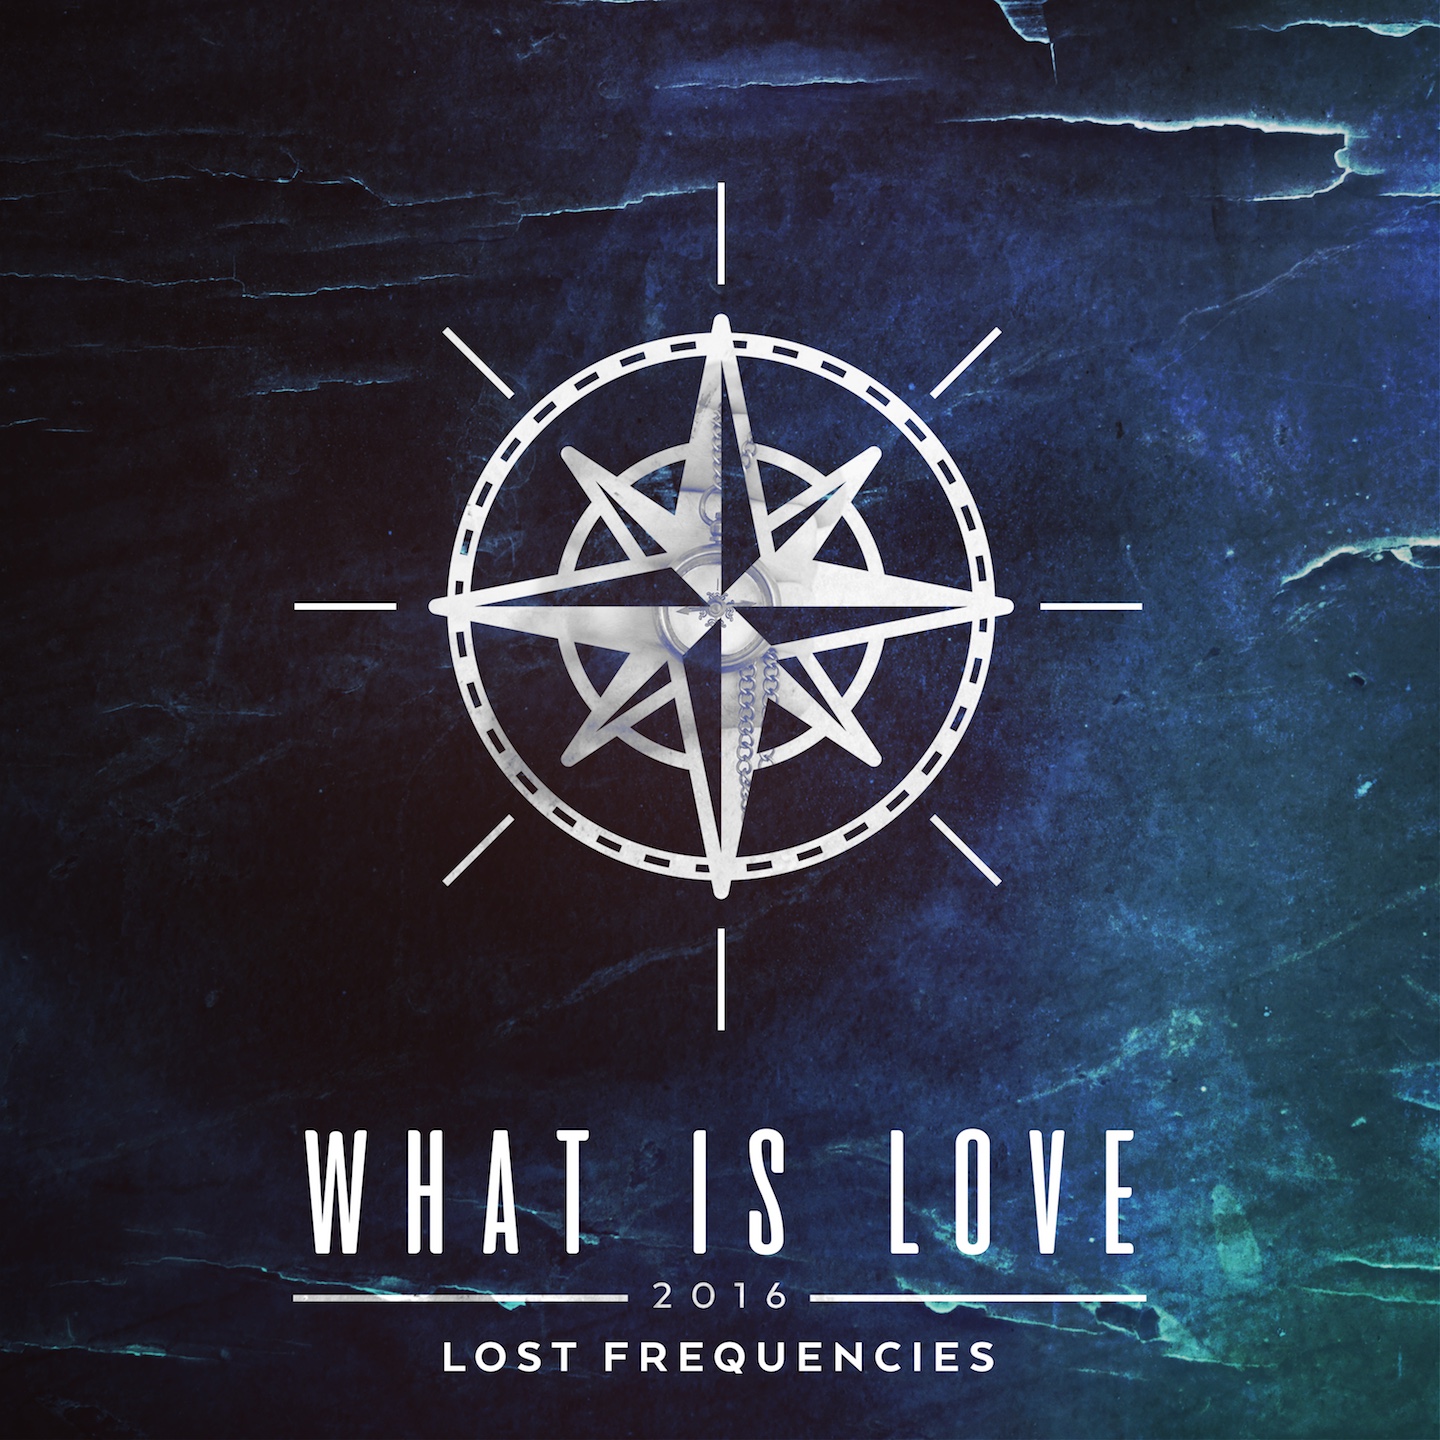 Lost Frequencies - What Is Love 2016 картинки